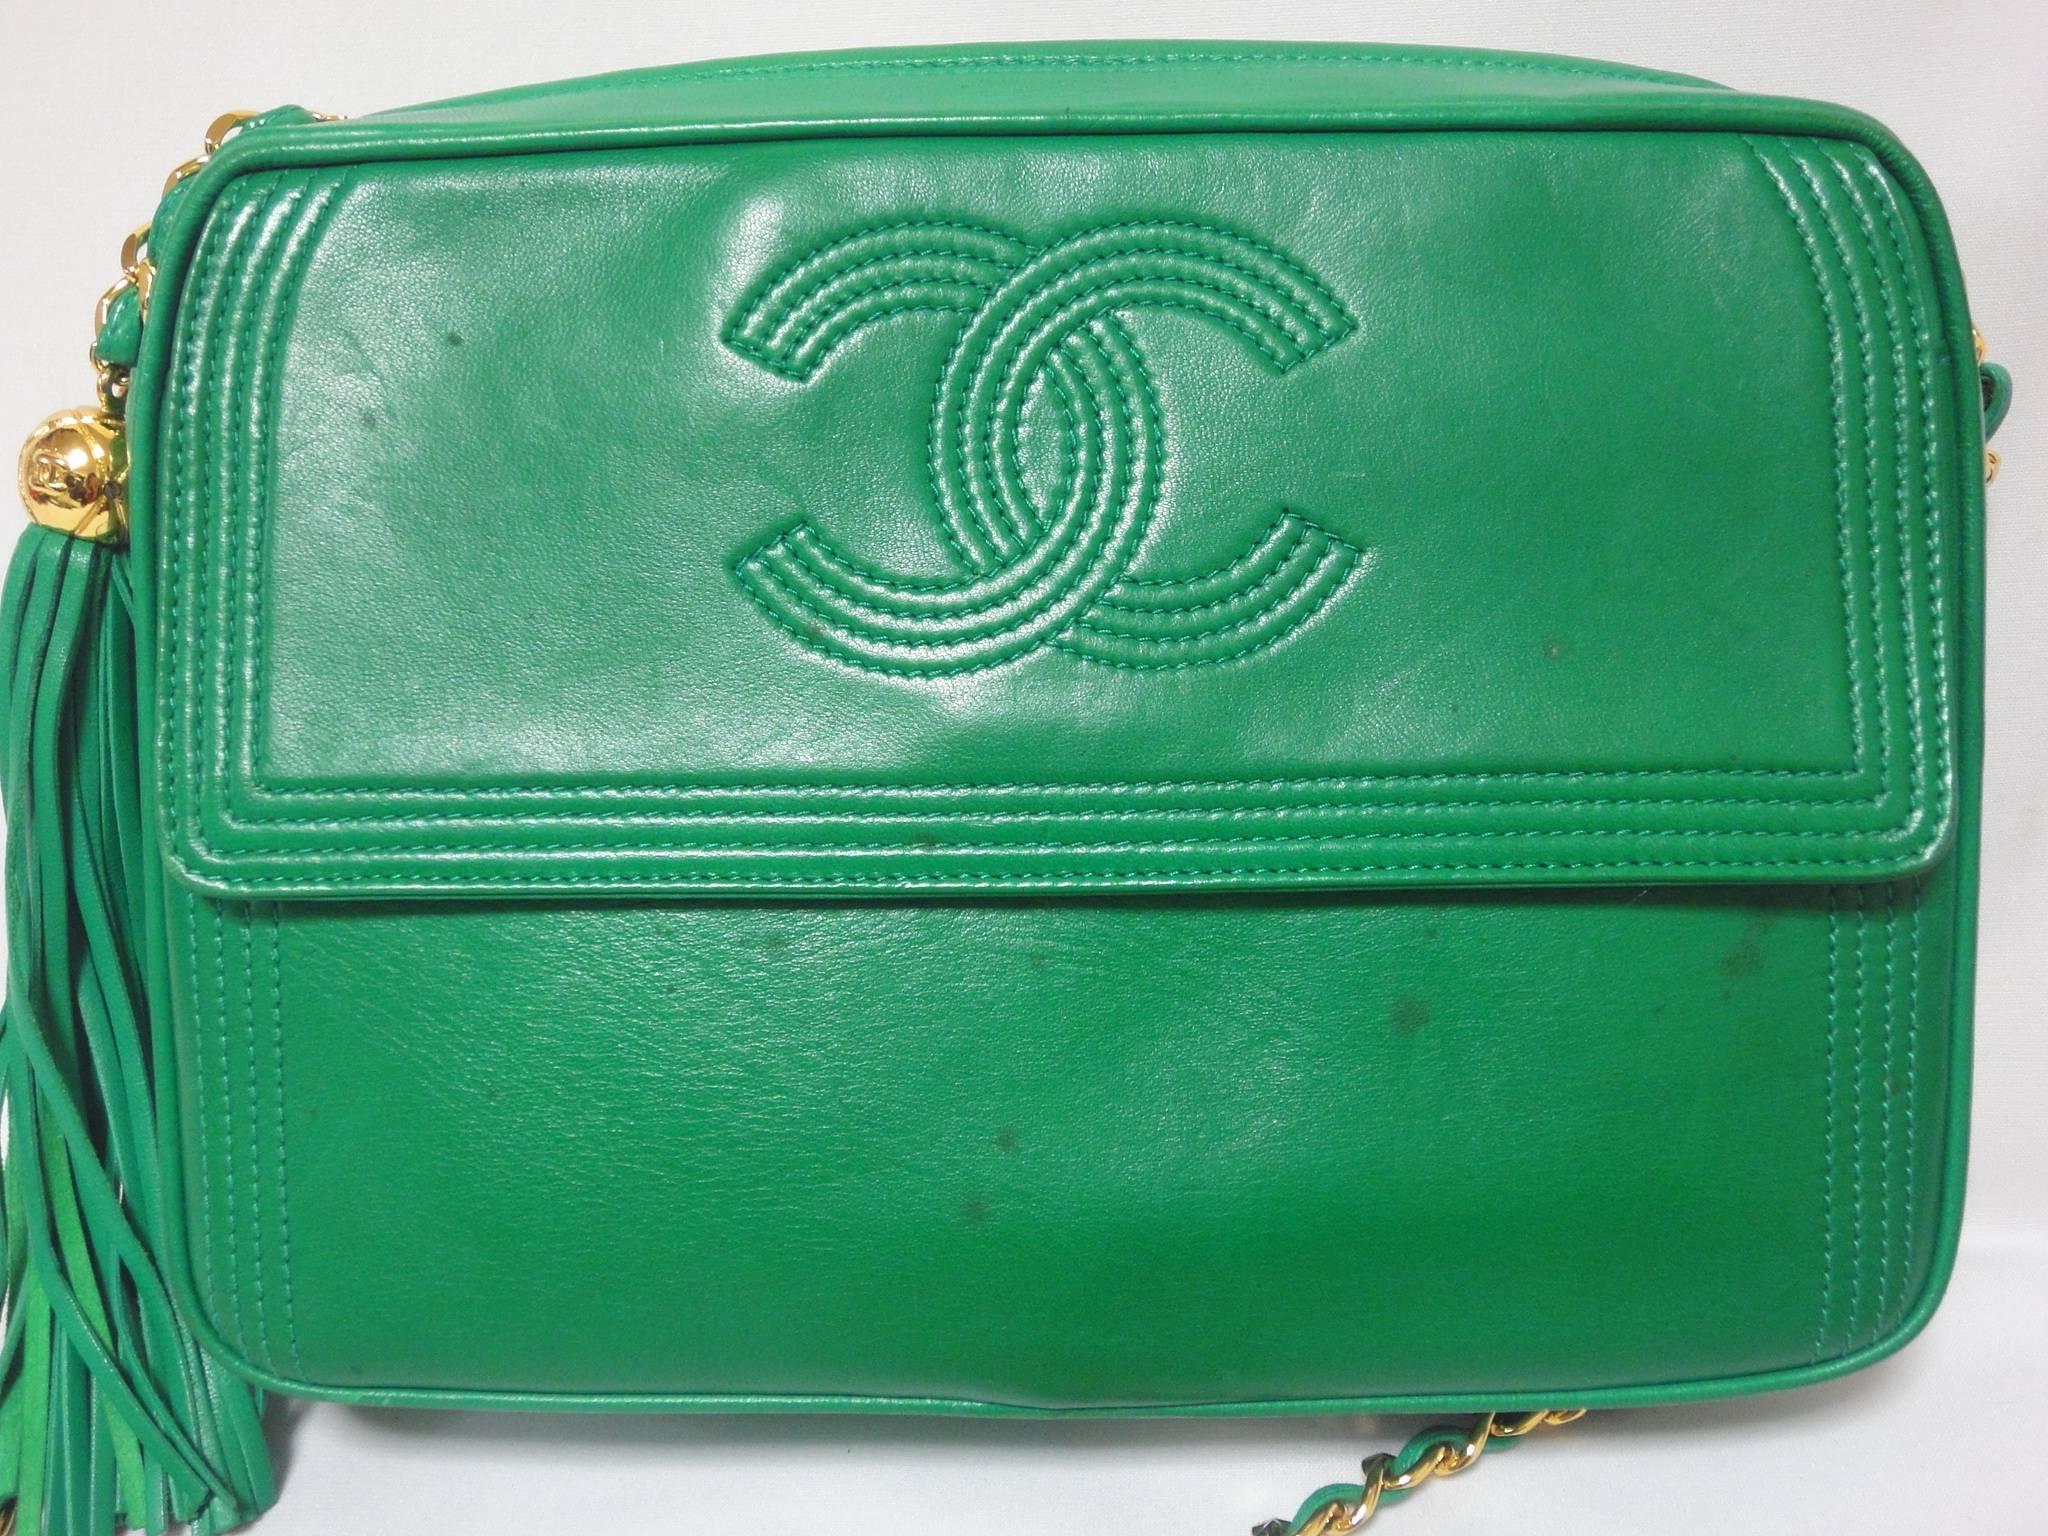 Here is another vintage piece from Chanel from the 90s, a rare green color camera bag in lambskin.
Definitely will be one of your best vintage Chanel bags for upcoming season, So chic!
If you are a vintage Chanel collector or lover, then this will